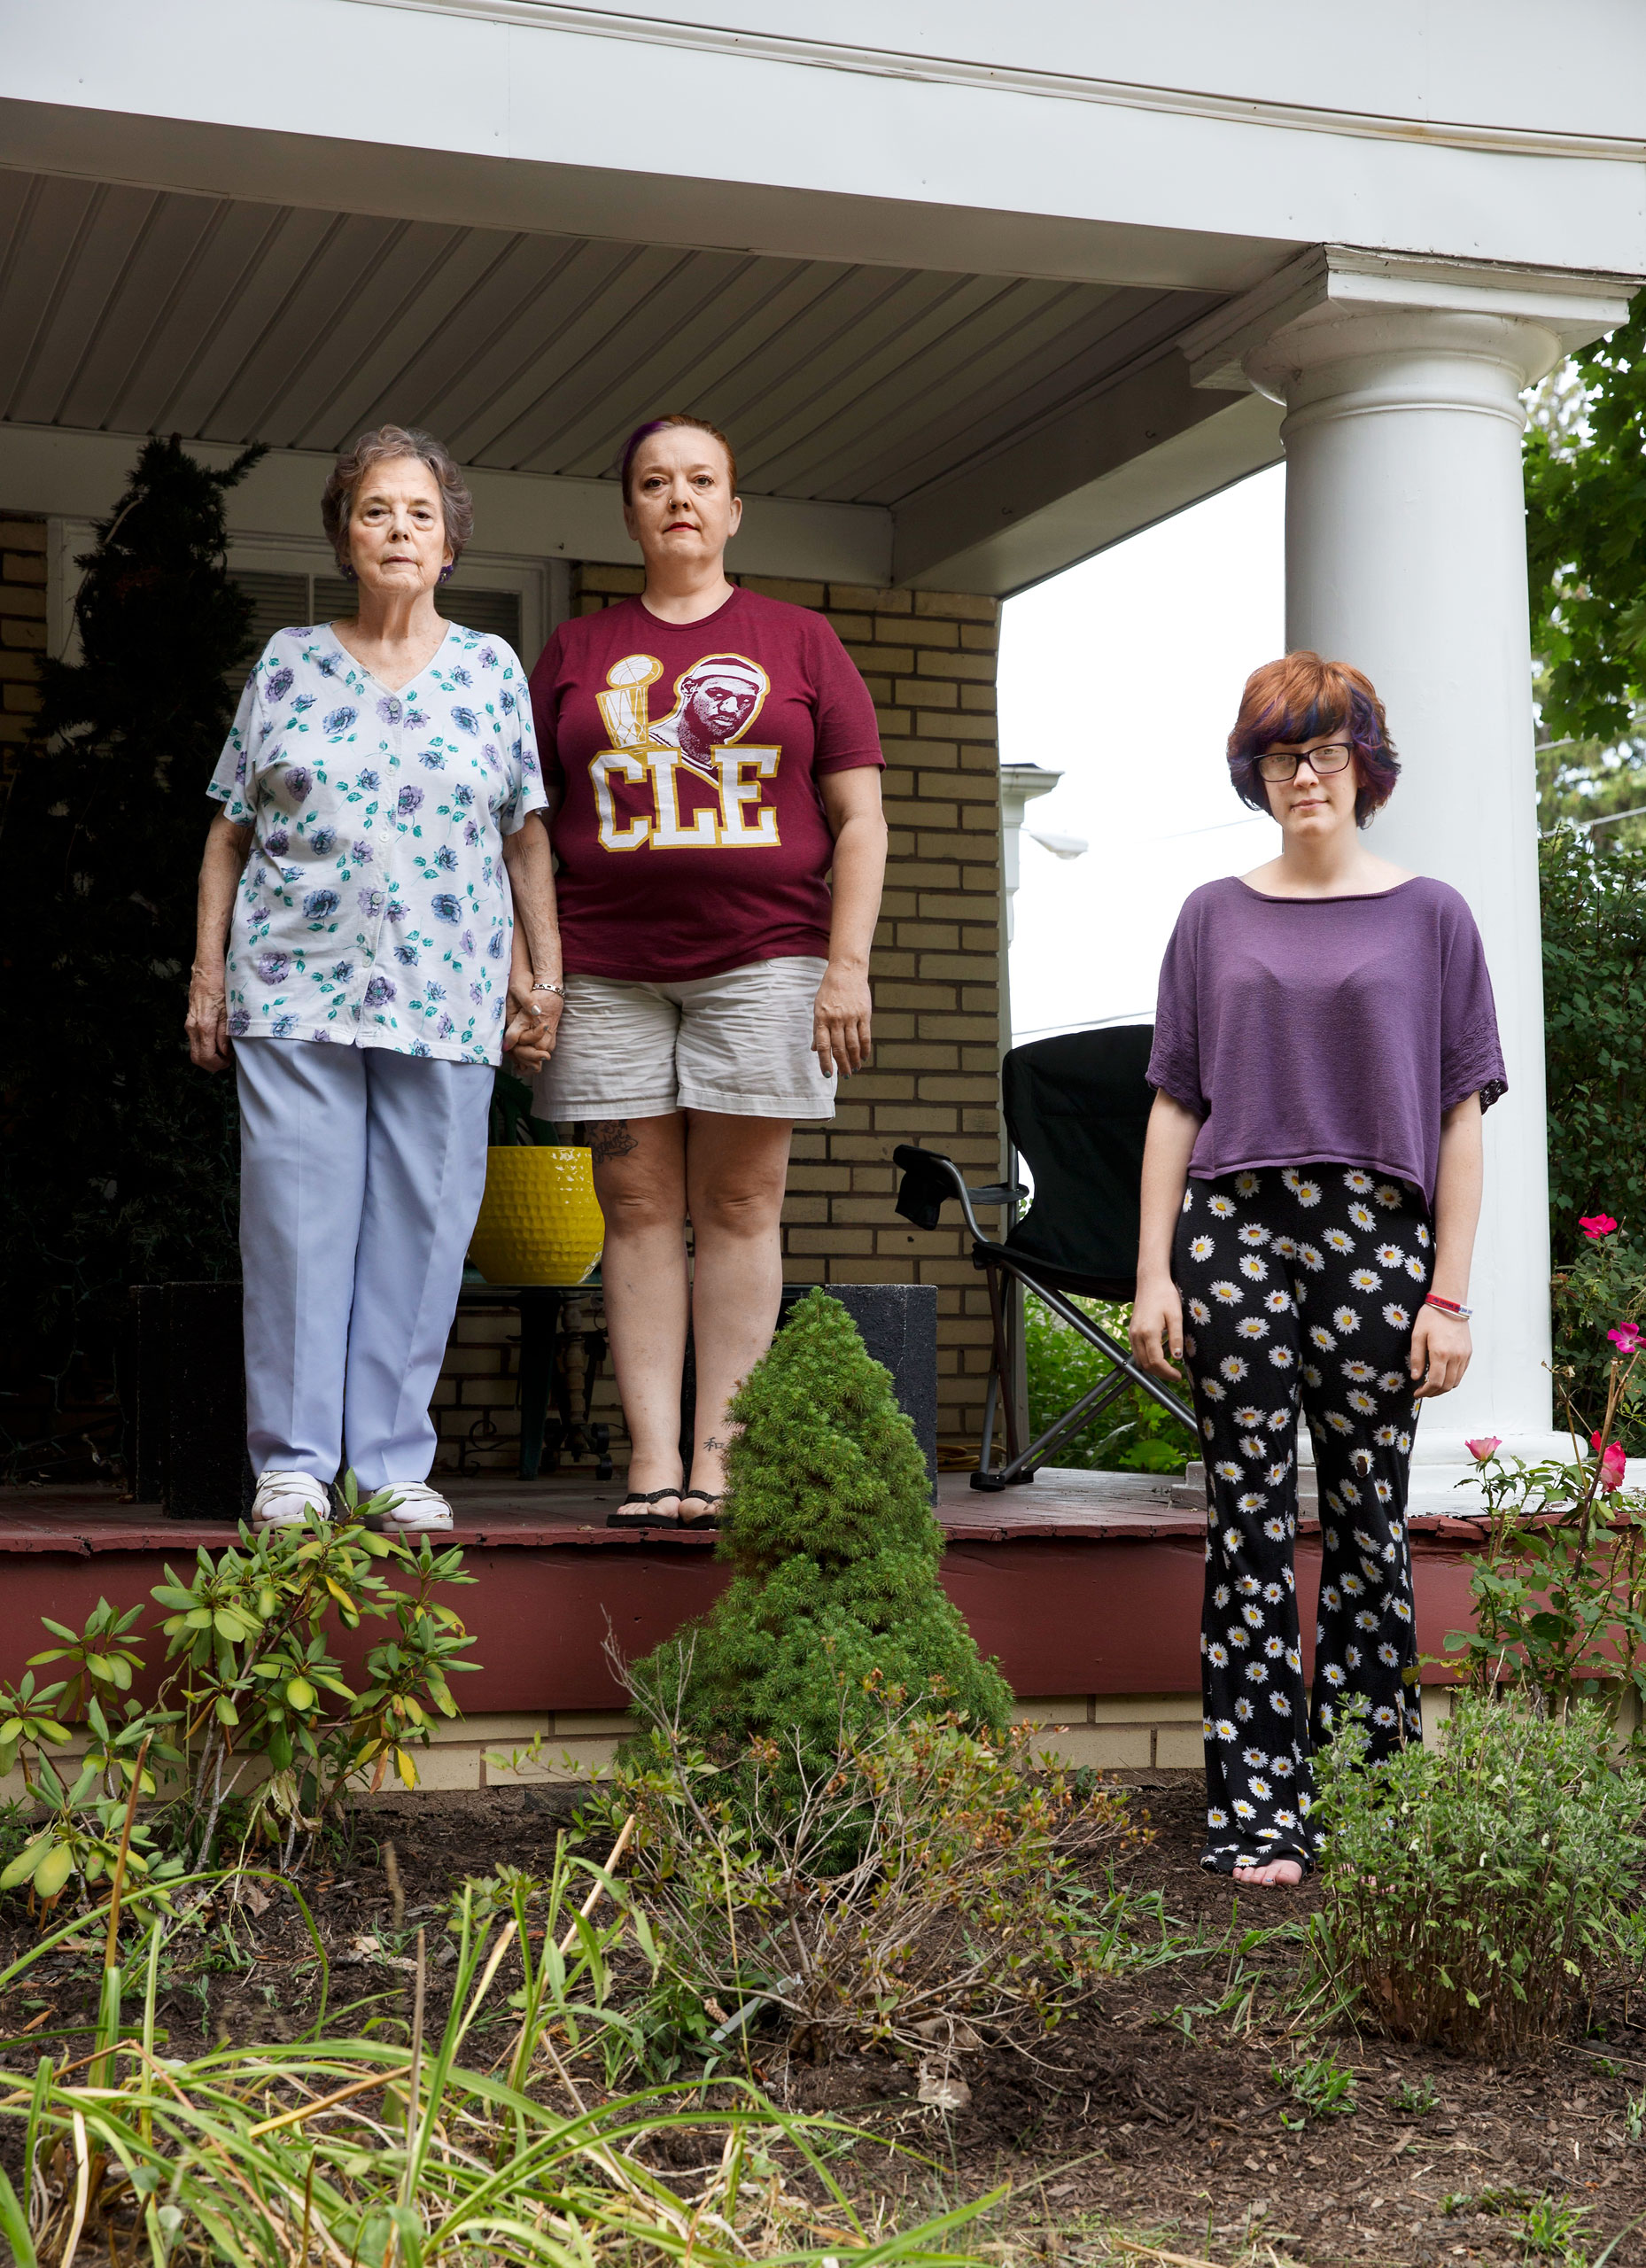 Carolyn Smith, 78; Cindy Smith, 49; and Josephine Sicking, 18, in front of Cindy’s home in Cleveland Heights, Ohio